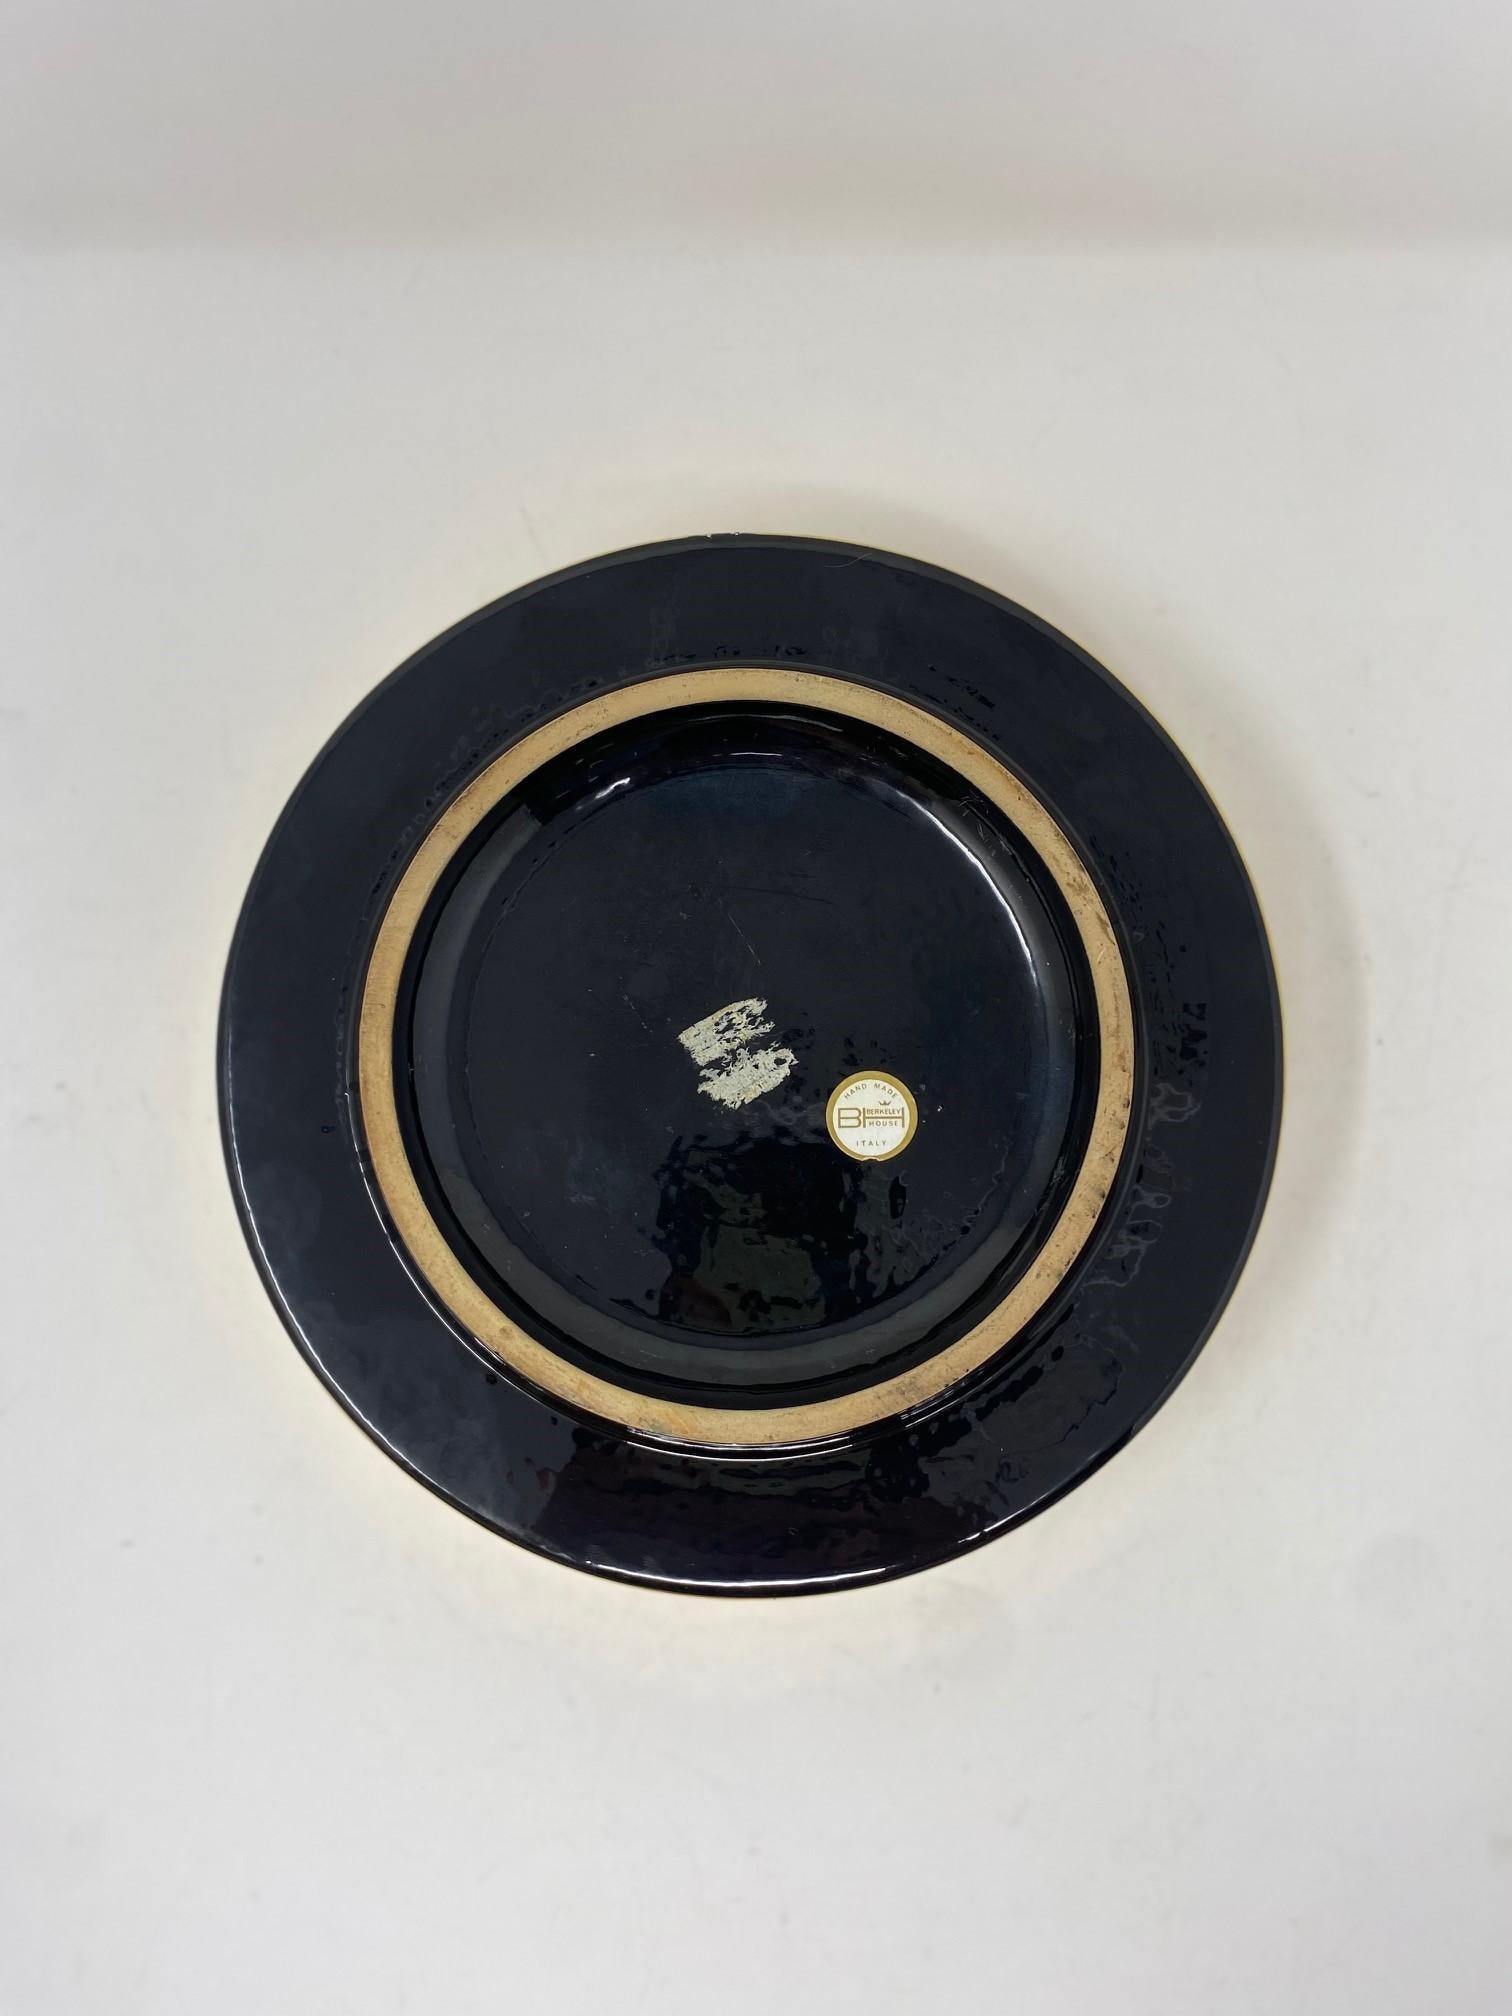 Bitossi Ceramic Ashtray Gold Berkeley House Signed Italy, 1960s In Good Condition For Sale In San Diego, CA